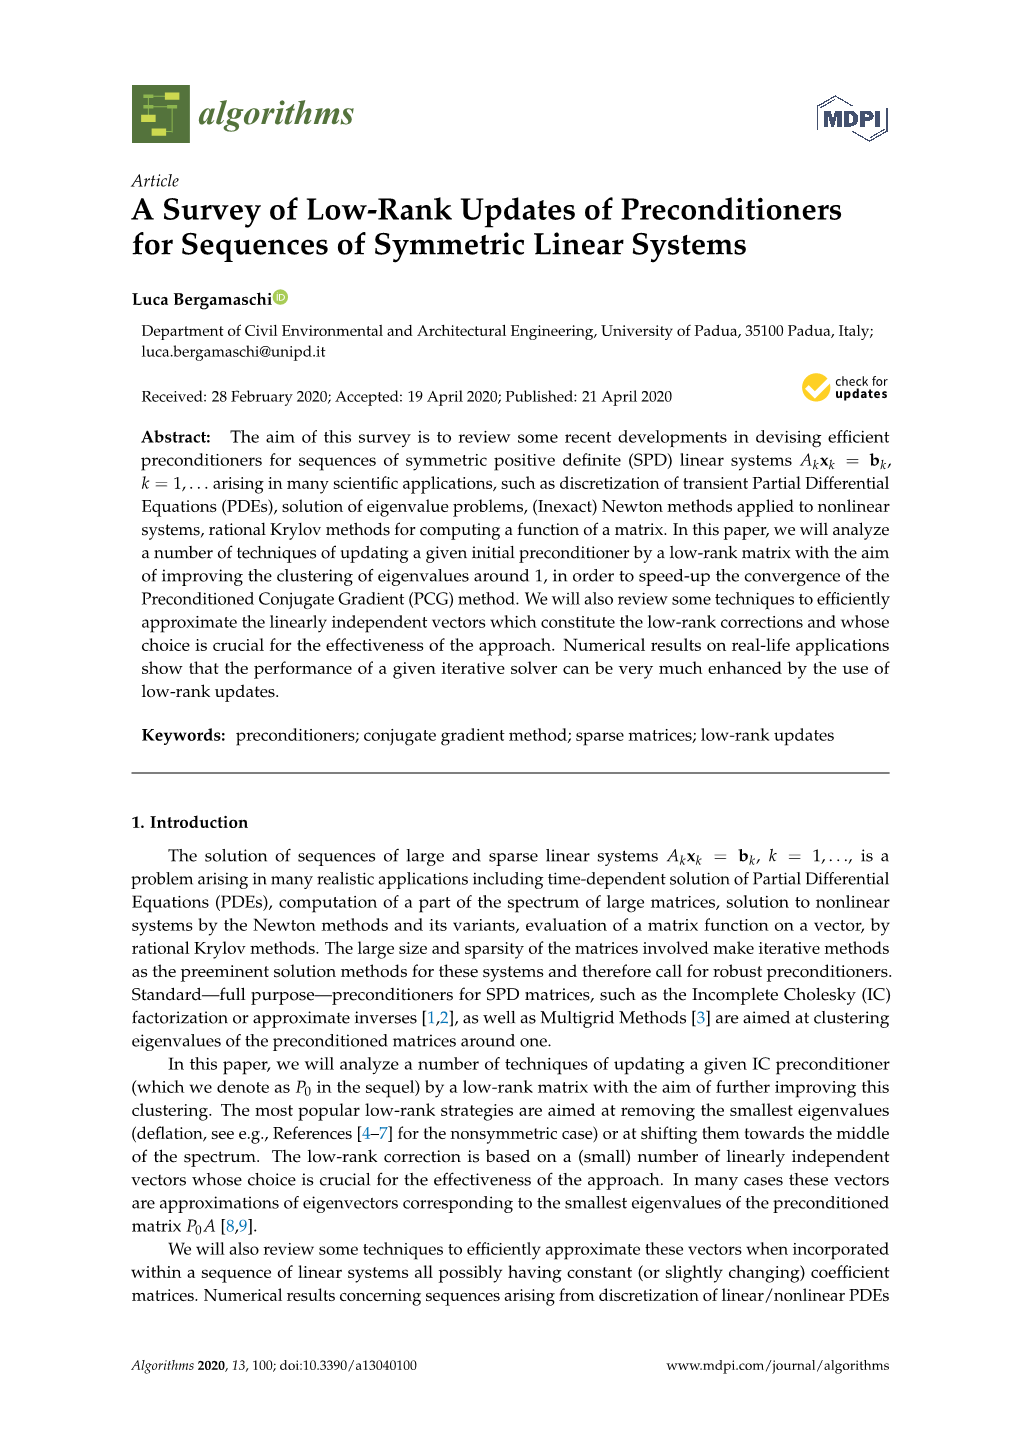 A Survey of Low-Rank Updates of Preconditioners for Sequences of Symmetric Linear Systems